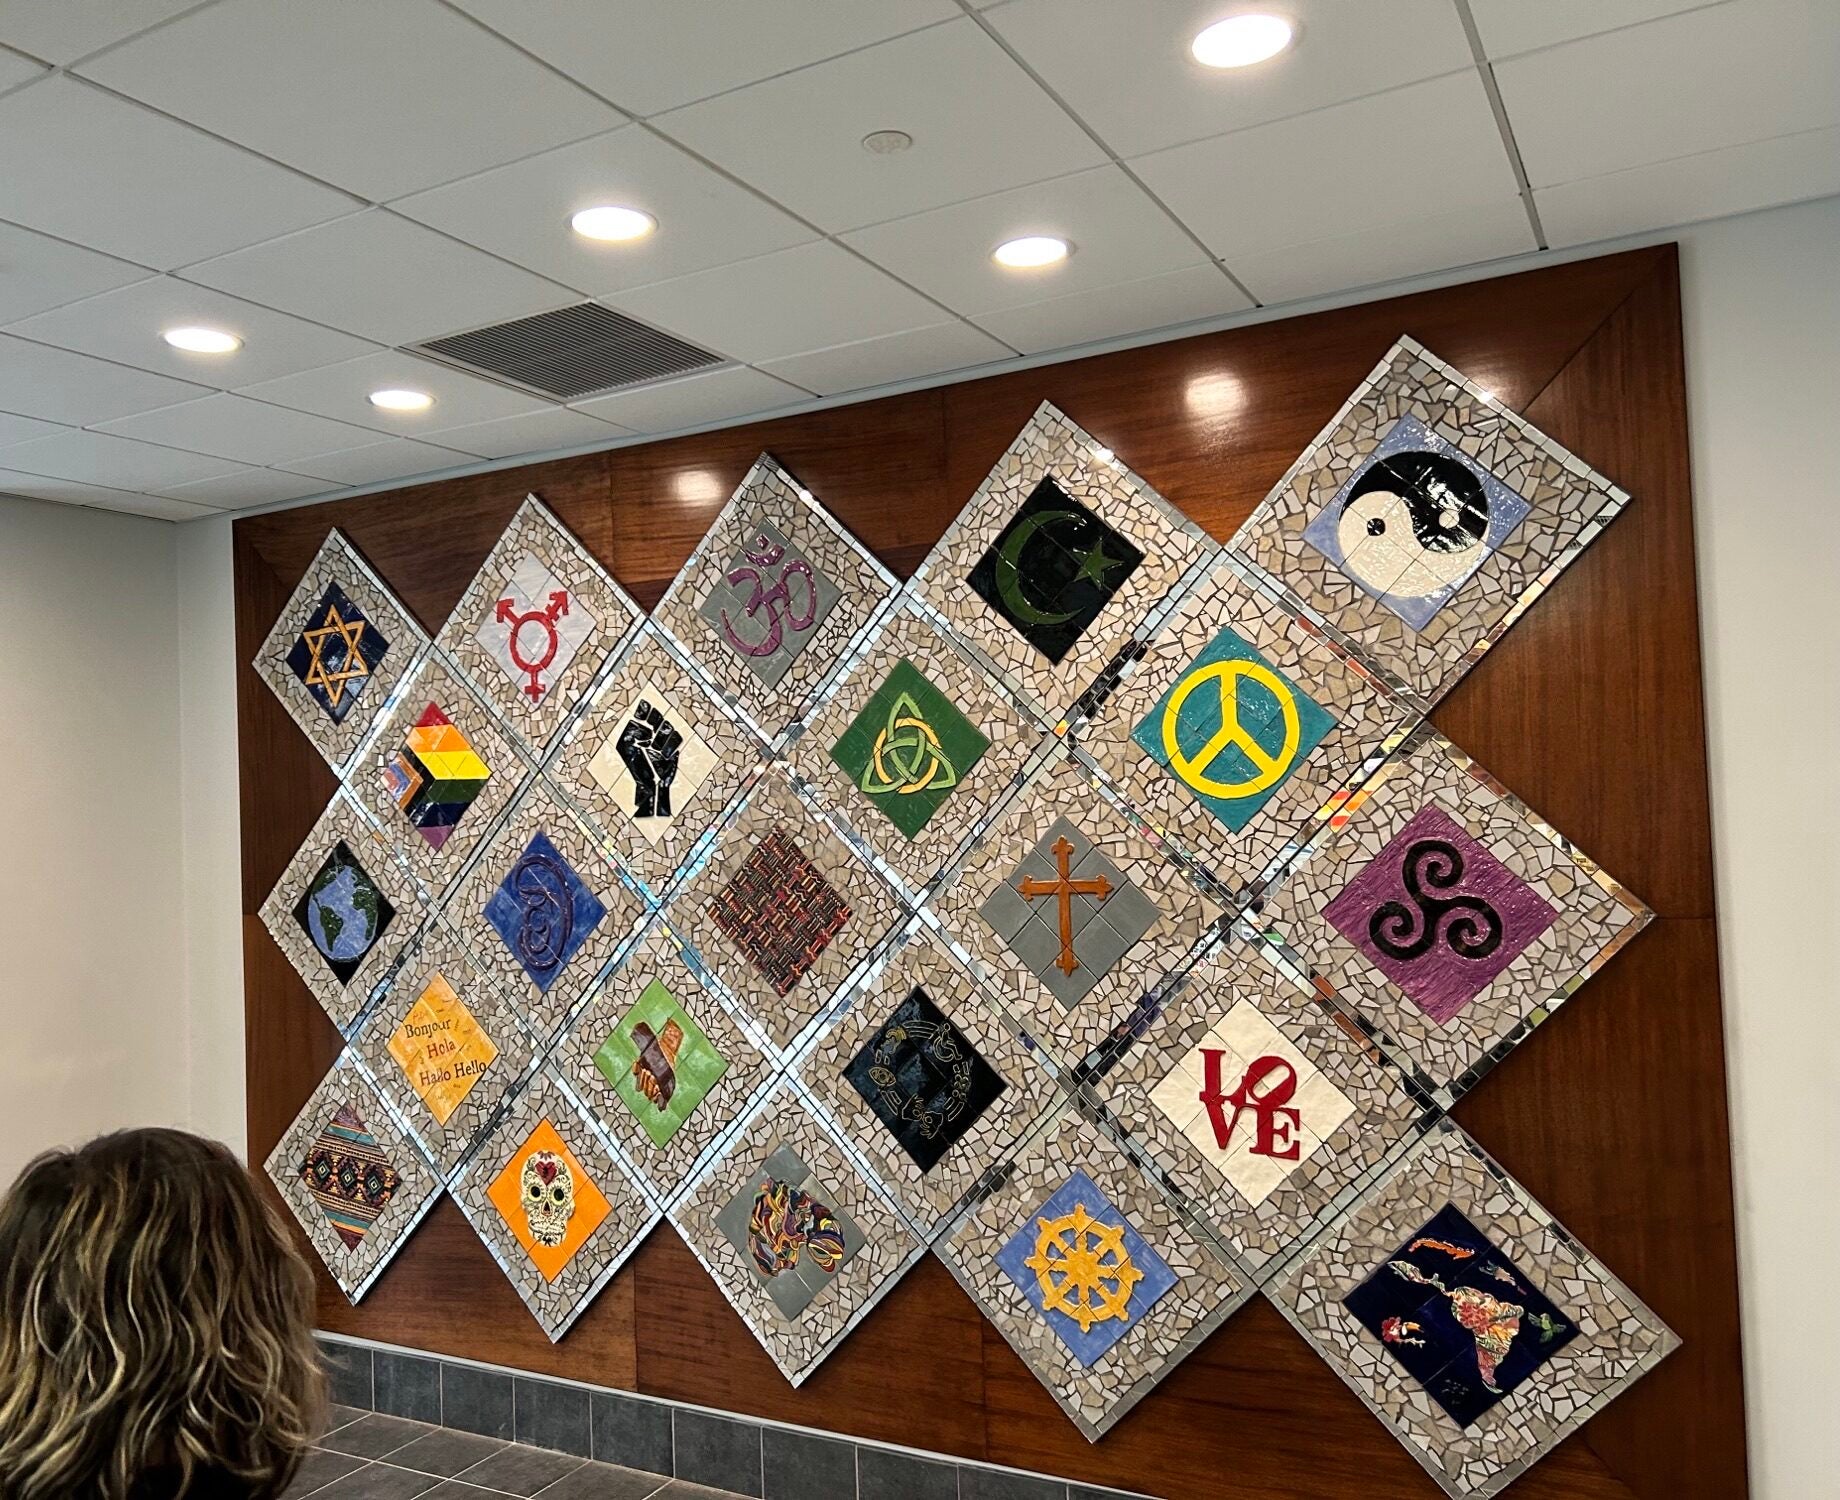 Students in the ceramics studio class at LVC designed a diversity, equity, and inclusion-themed mosaic mural on campus.